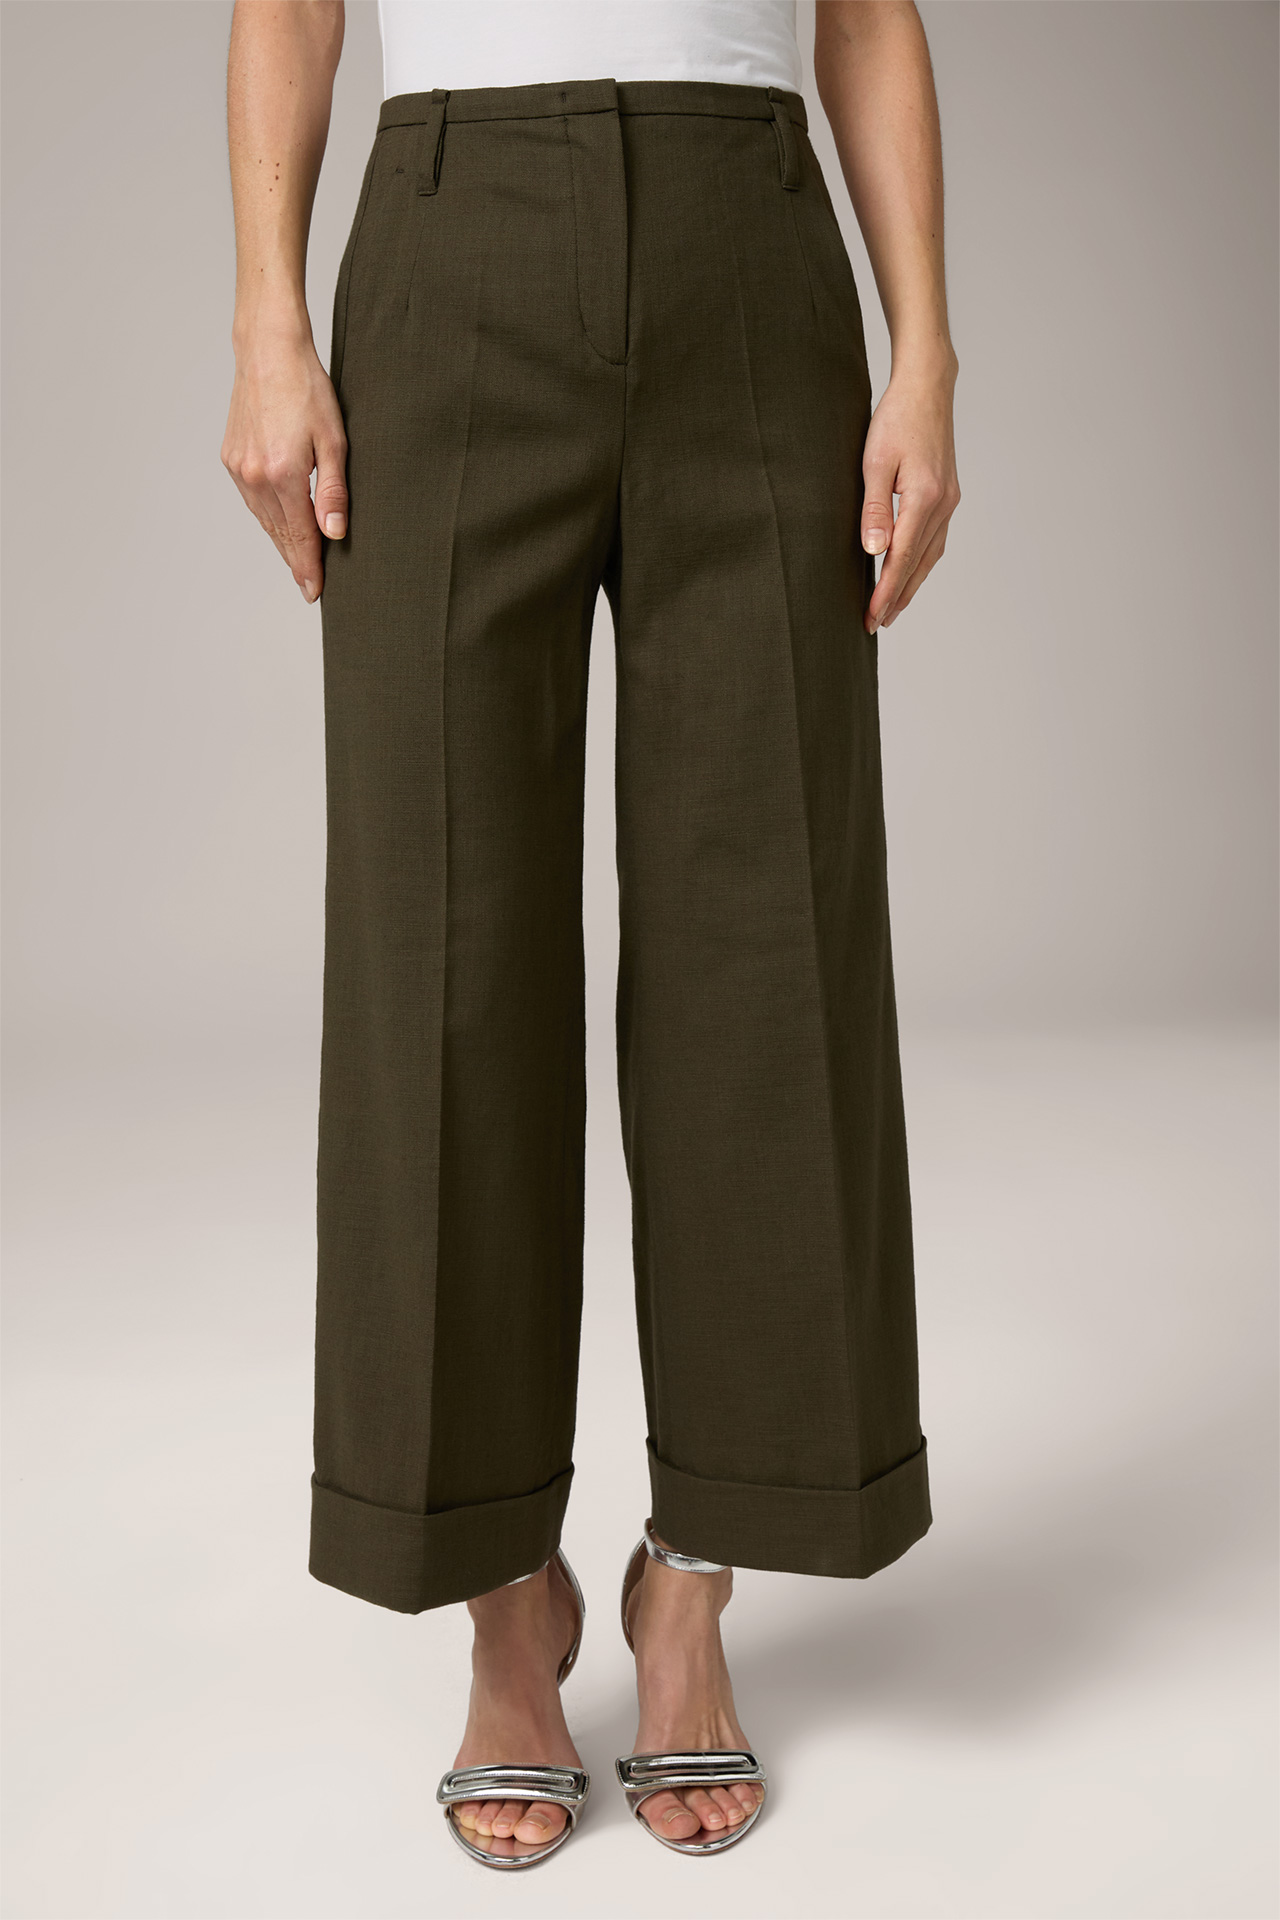 Cotton Blend Culottes in Olive